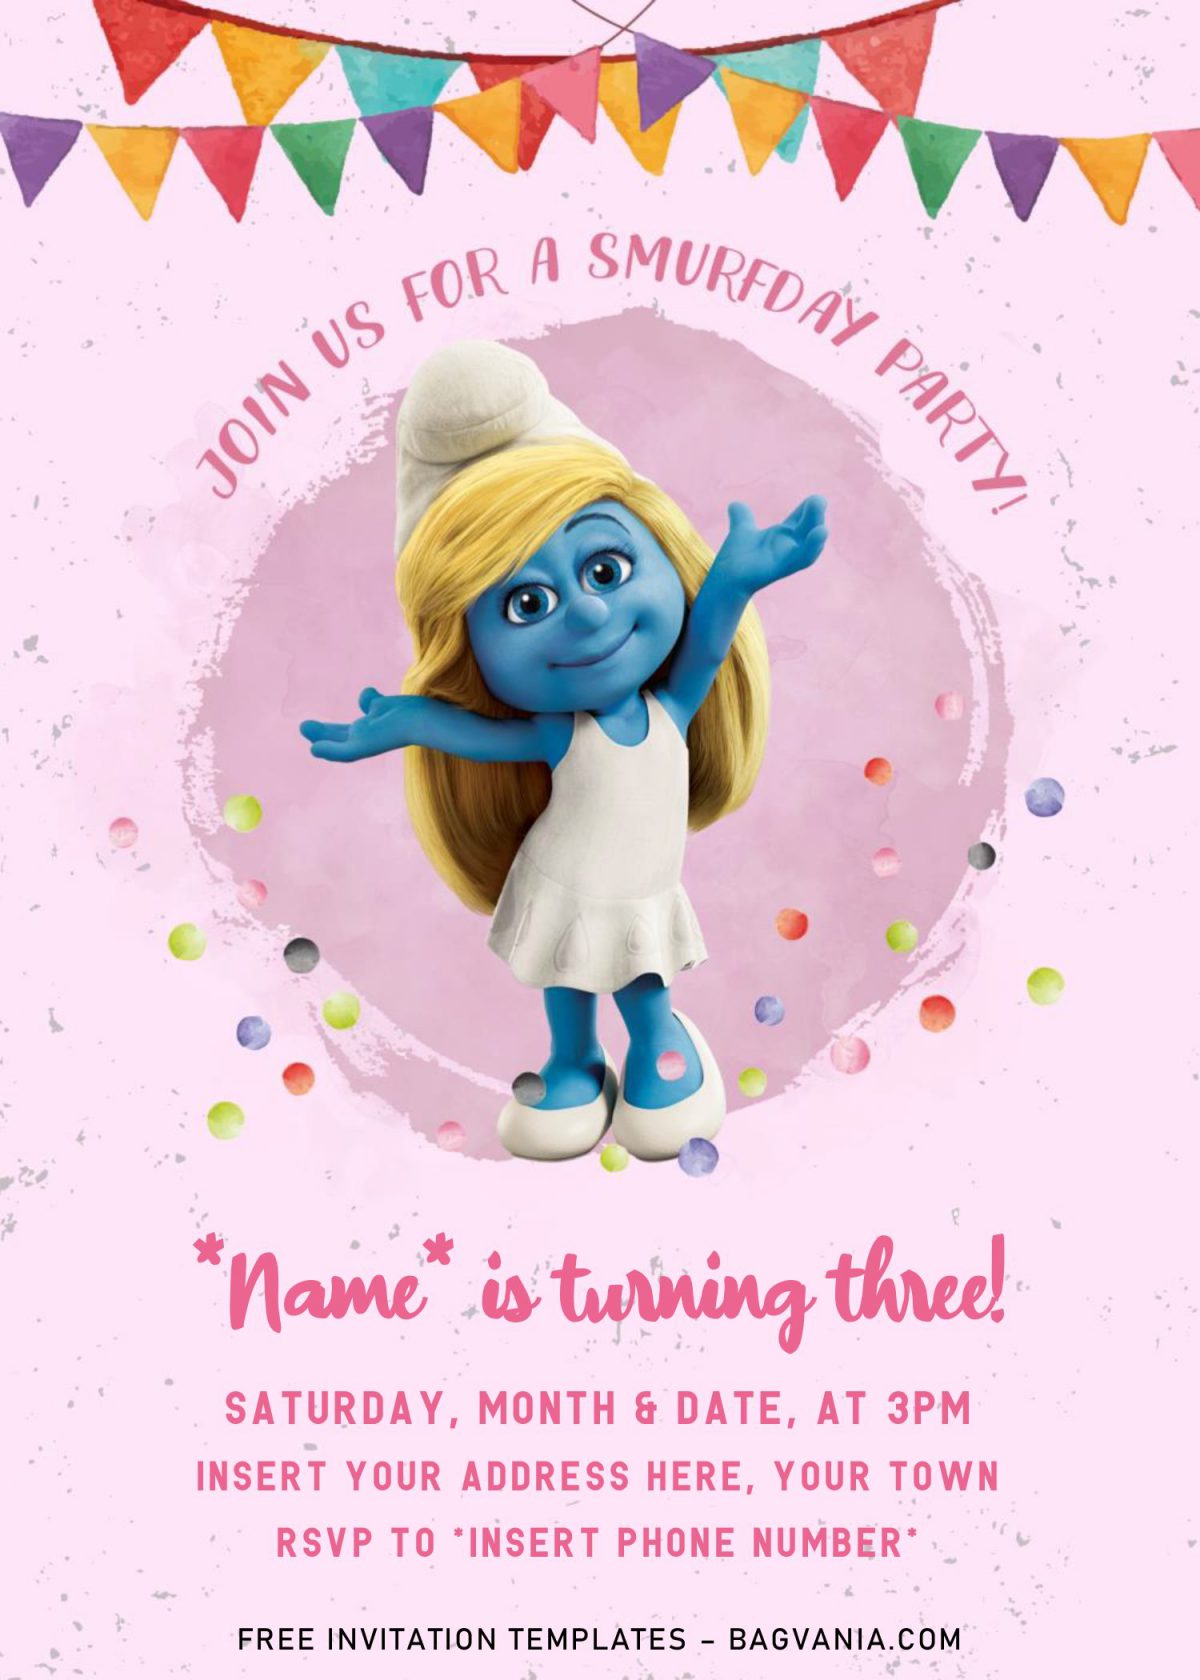 Free Smurf Birthday Invitation Templates For Free and has cute font styles